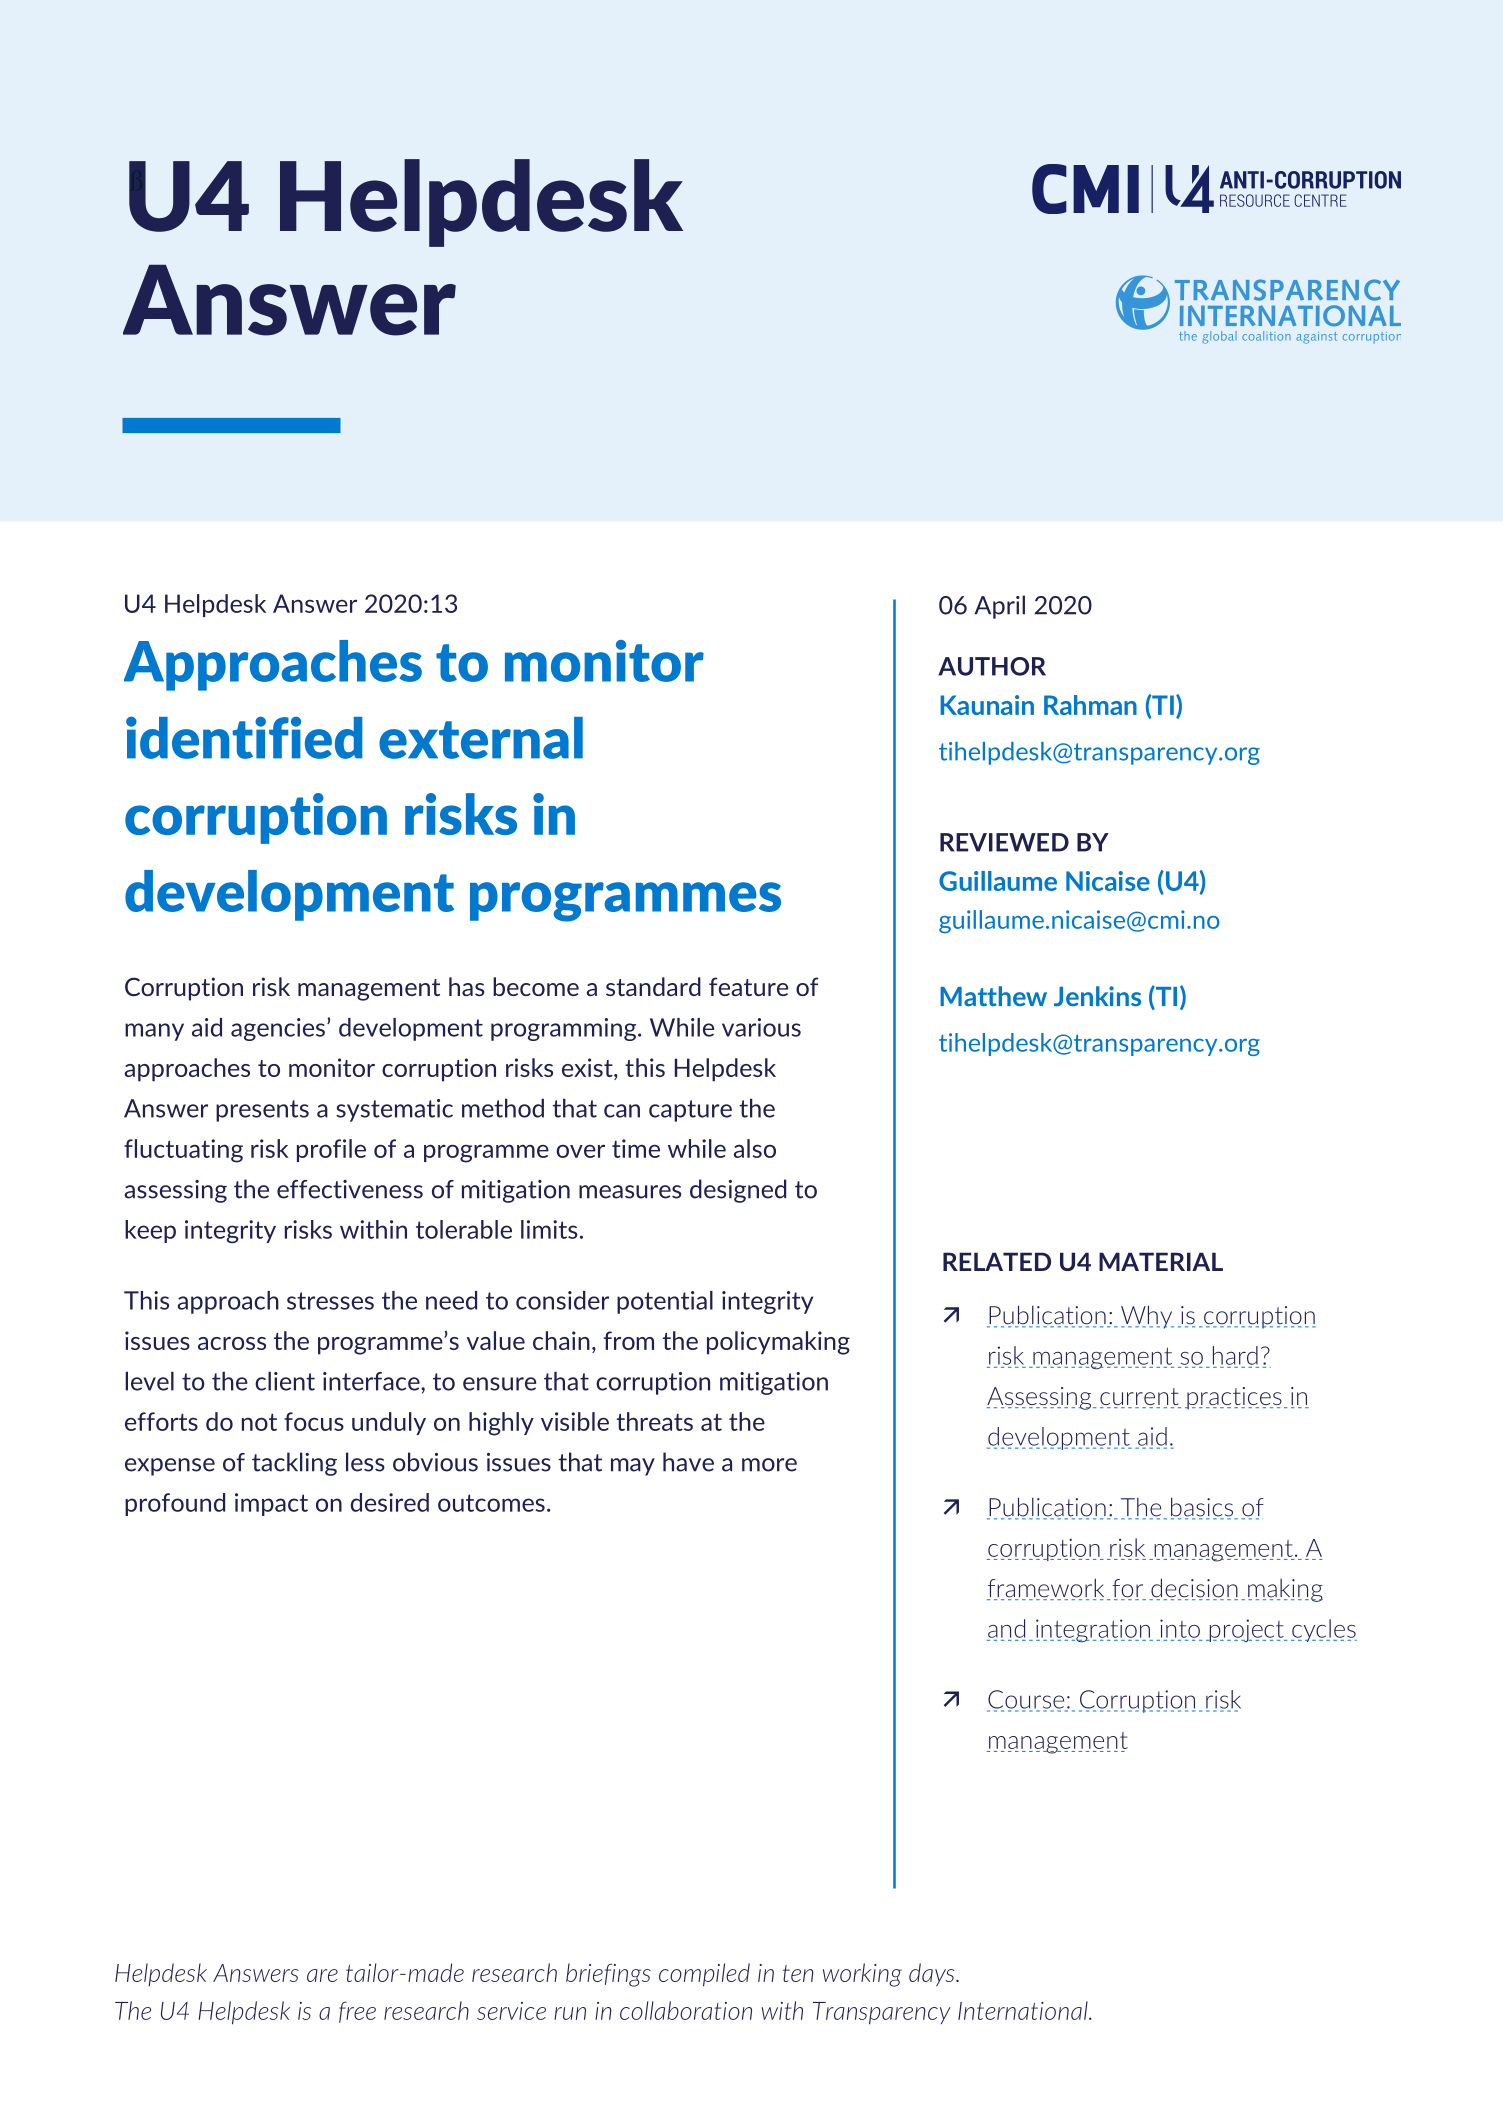 Approaches to monitor identified external corruption risks in development programmes